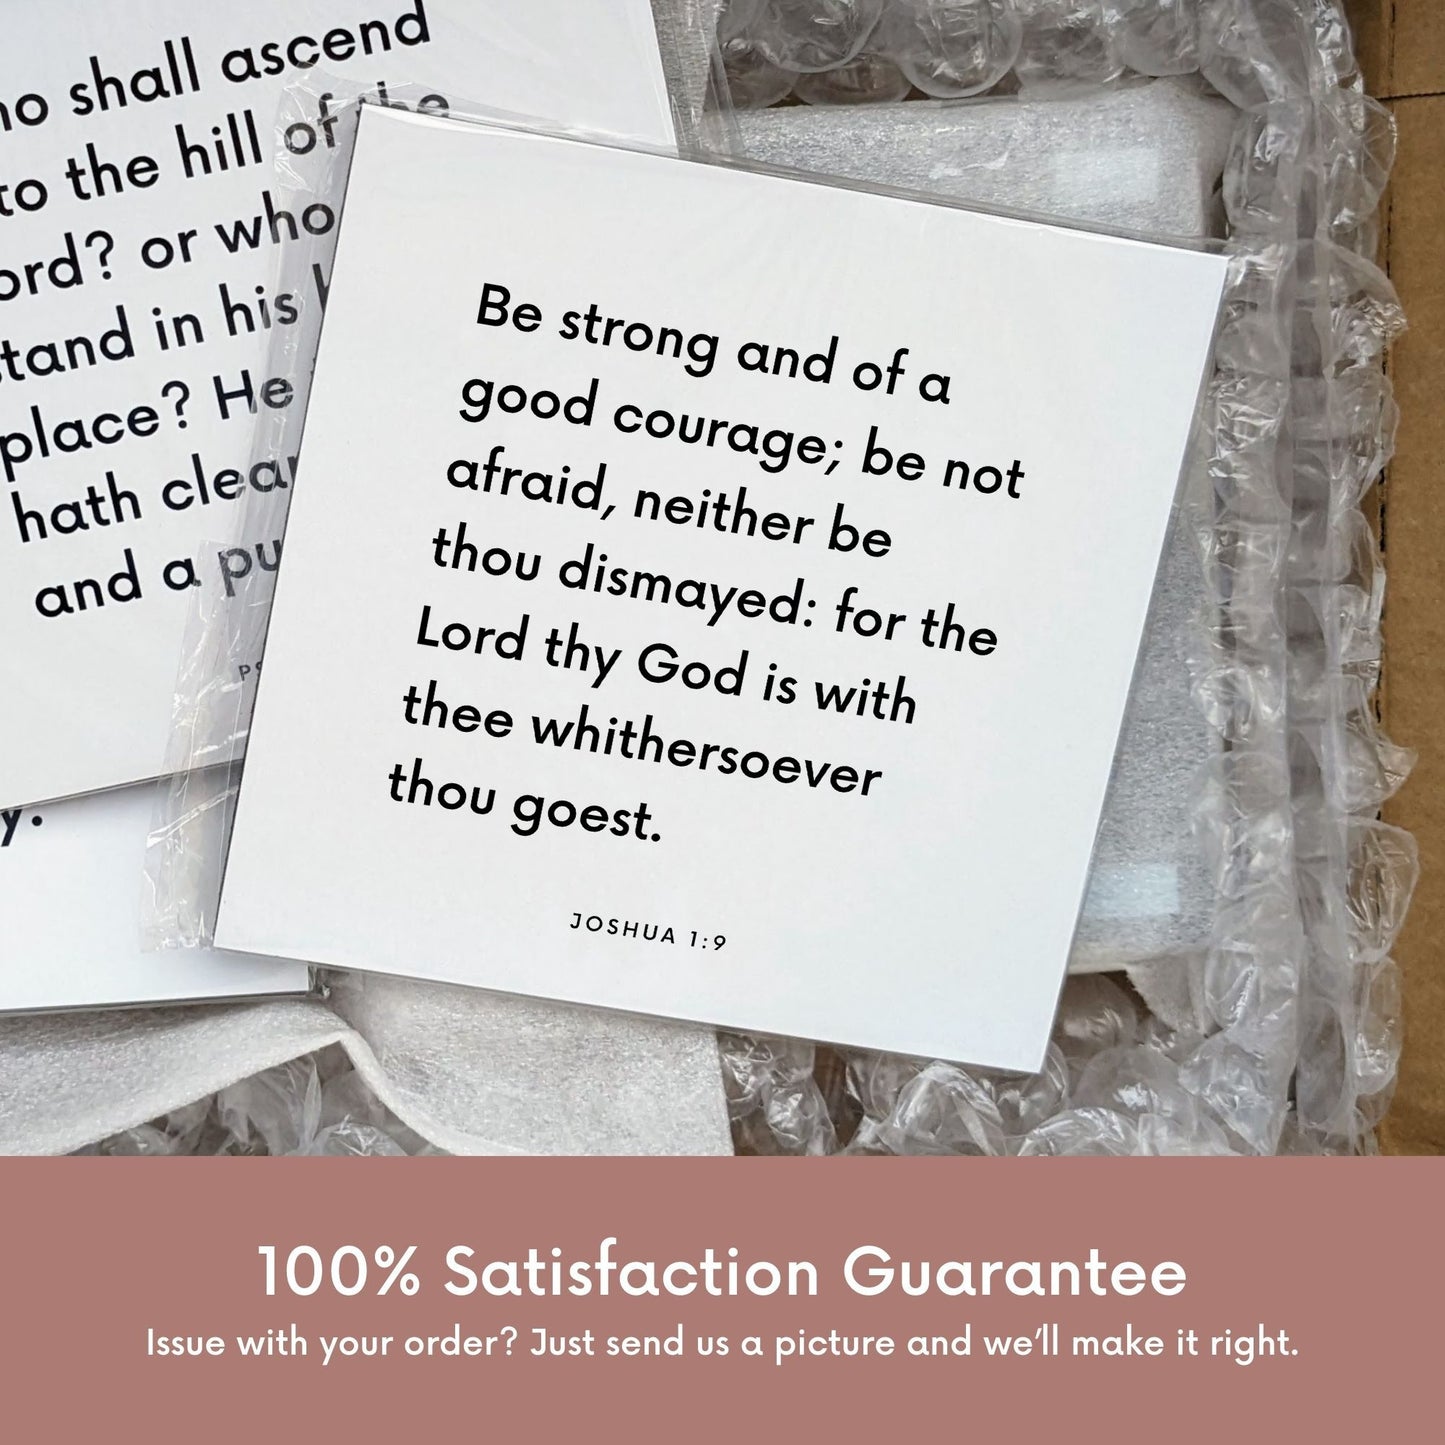 Shipping materials for scripture tile of Joshua 1:9 - "Be strong and of a good courage"